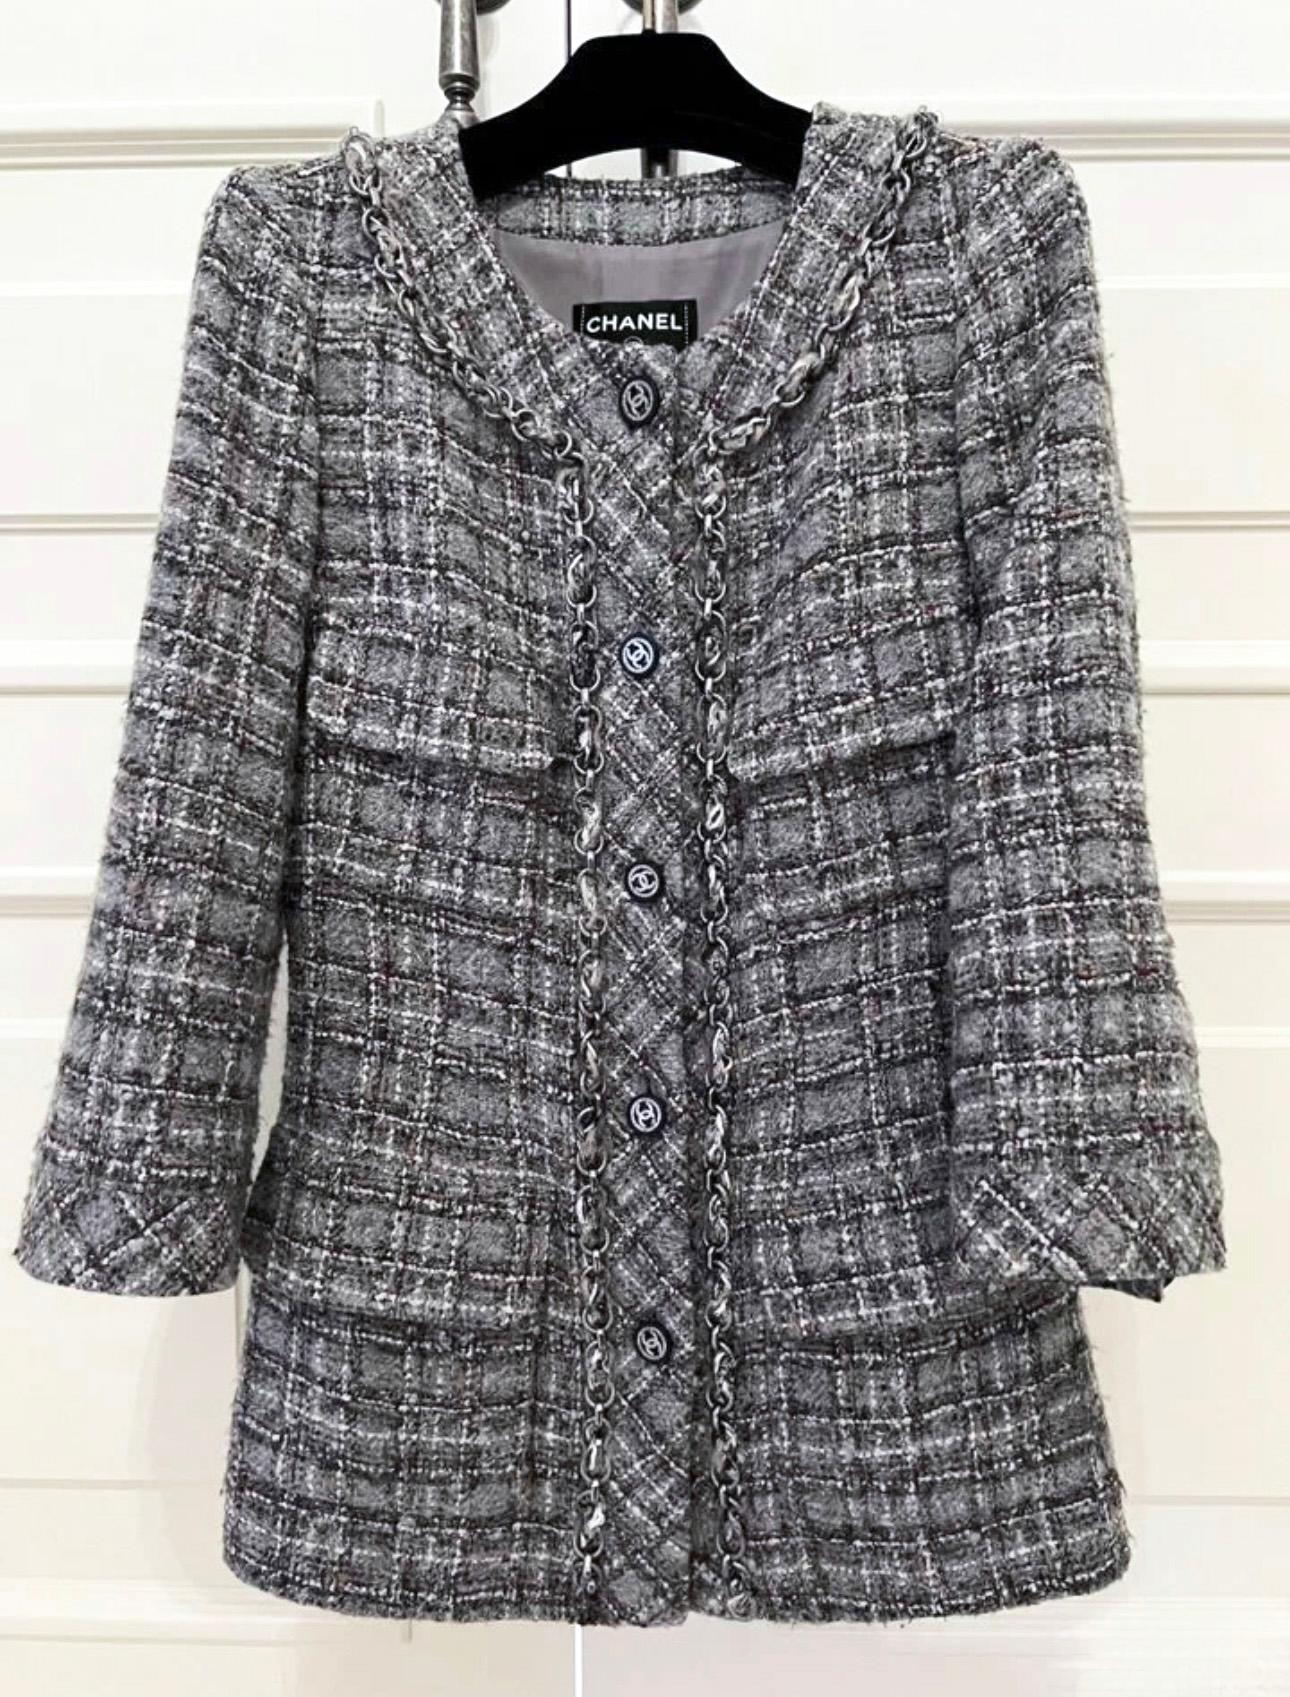 Chanel Metallic Chain Trim Tweed Jacket In Excellent Condition For Sale In Dubai, AE